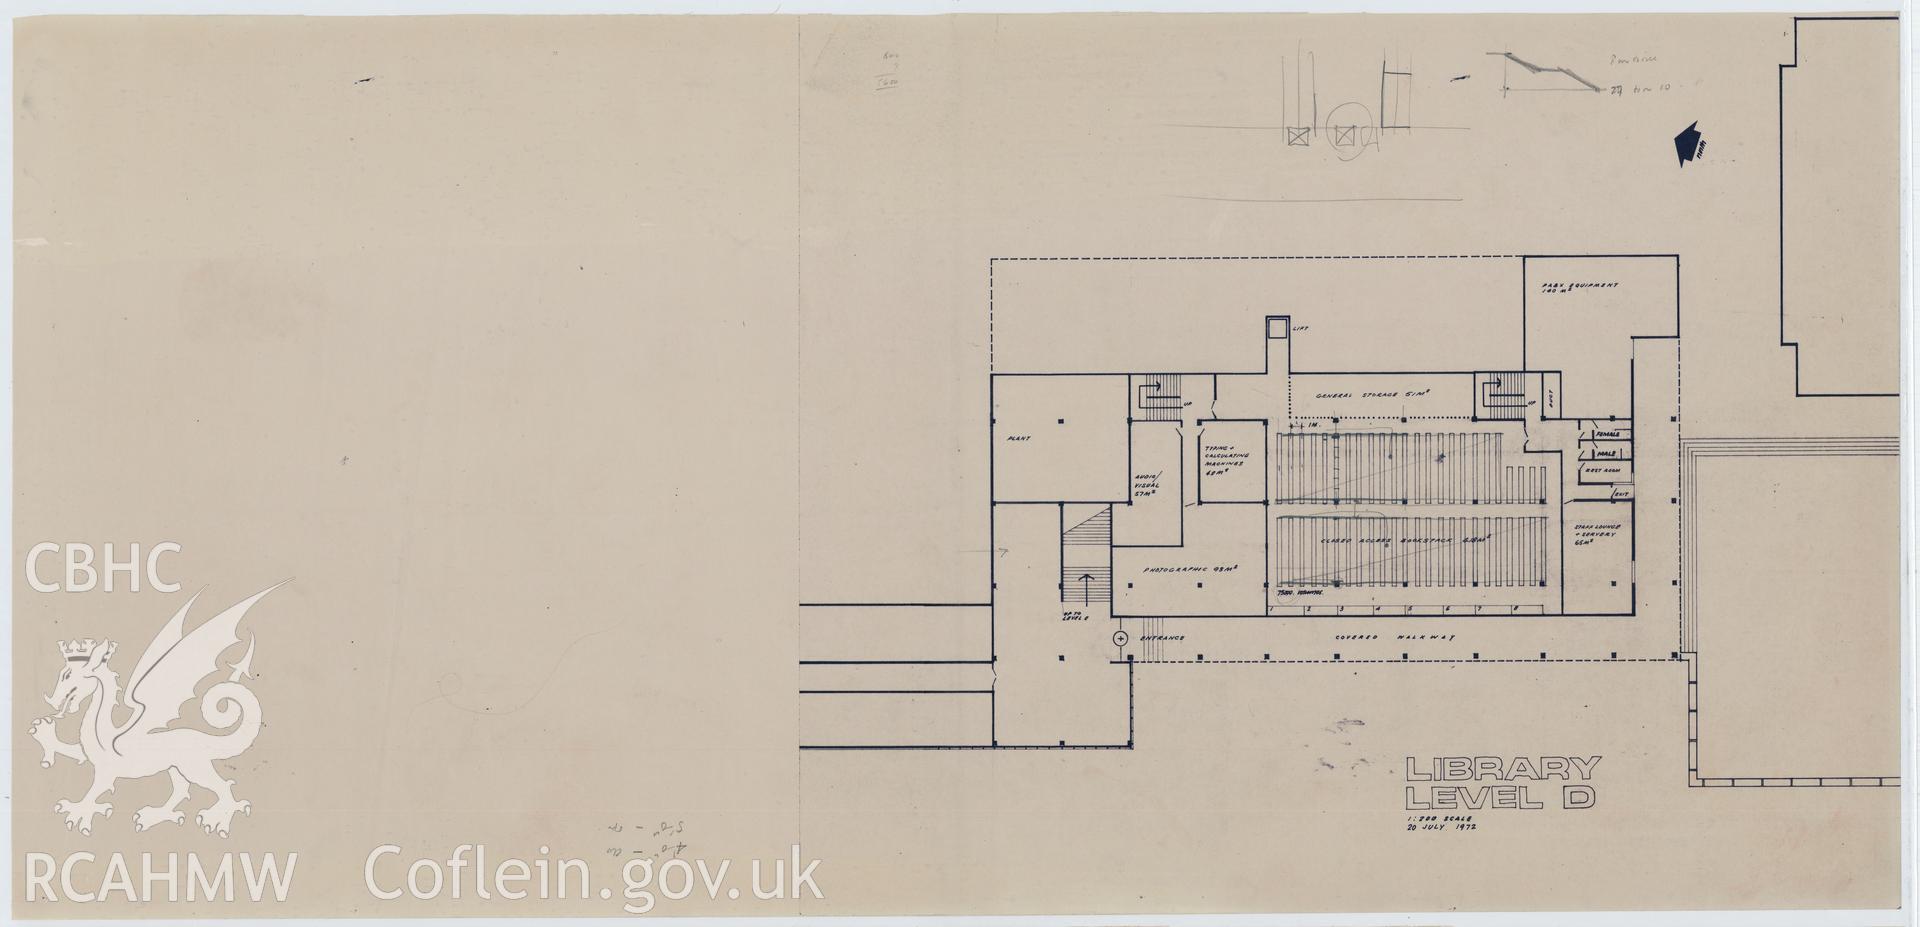 Digital copy of a plan showing Library Level D of the proposed Library Arts Complex at University College Aberystwyth, produced by Percy Thomas Partnership. Scale 1:200.